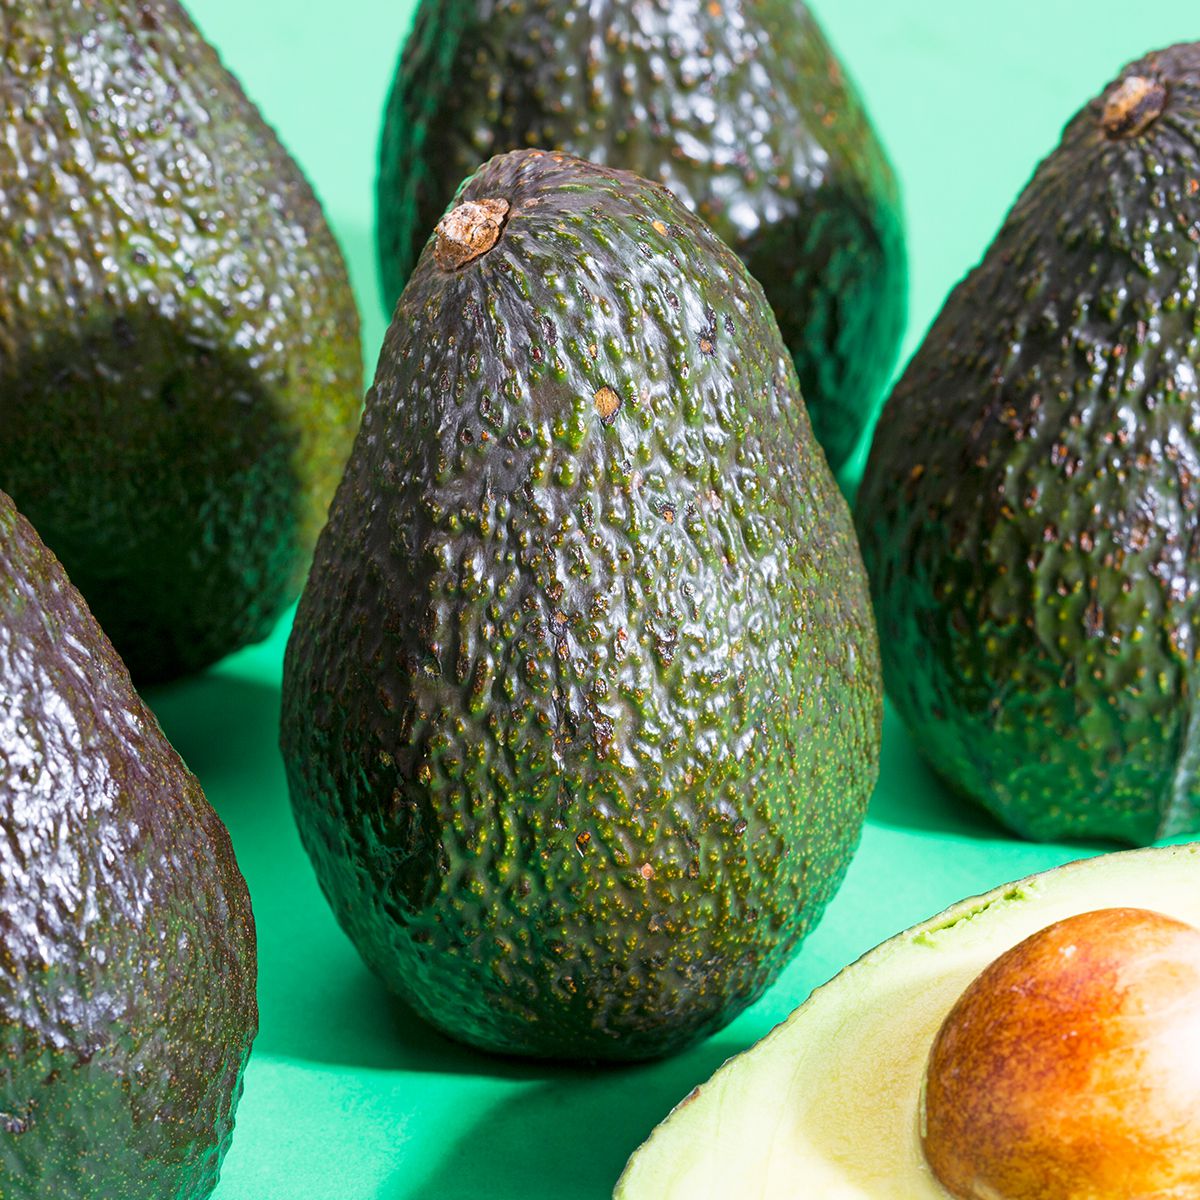 Avocados From Mexico Ripe Hass Avocados 60 Ct